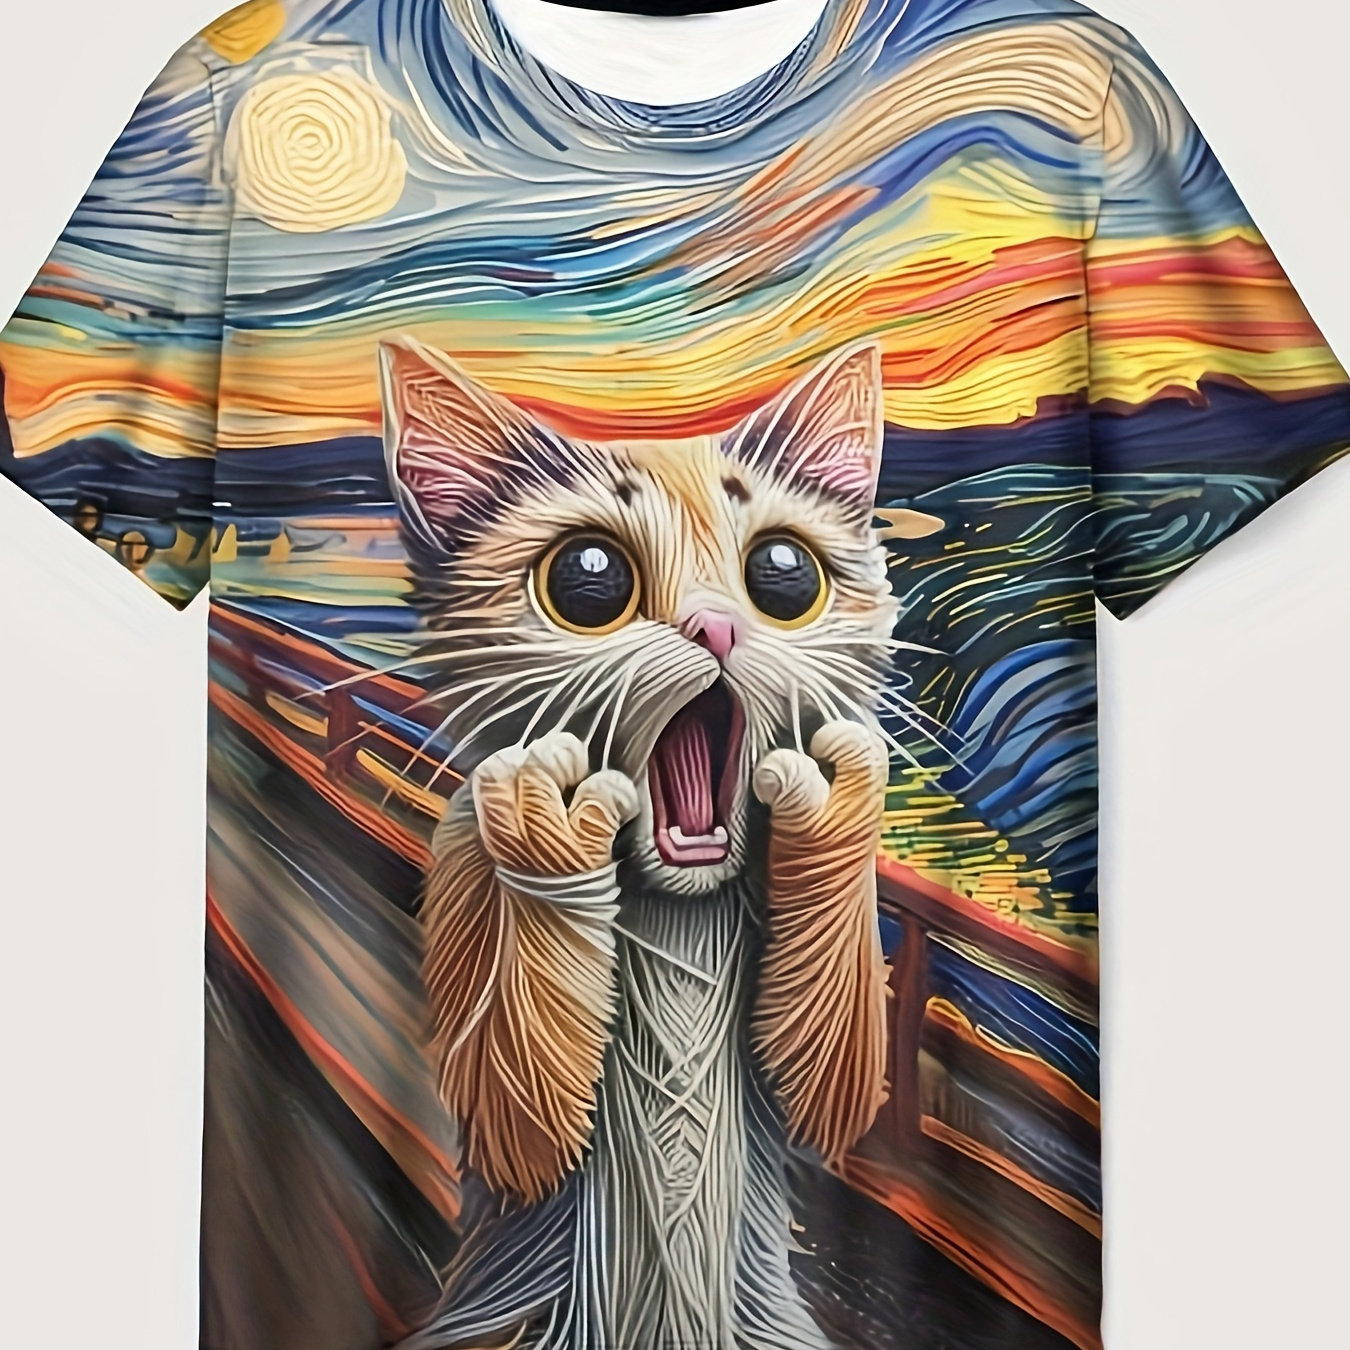 

Men's Painting Style Screaming Cat Pattern Crew Neck Short Sleeve T-shirt, Casual And Stylish Tops For Summer Daily Leisurewear